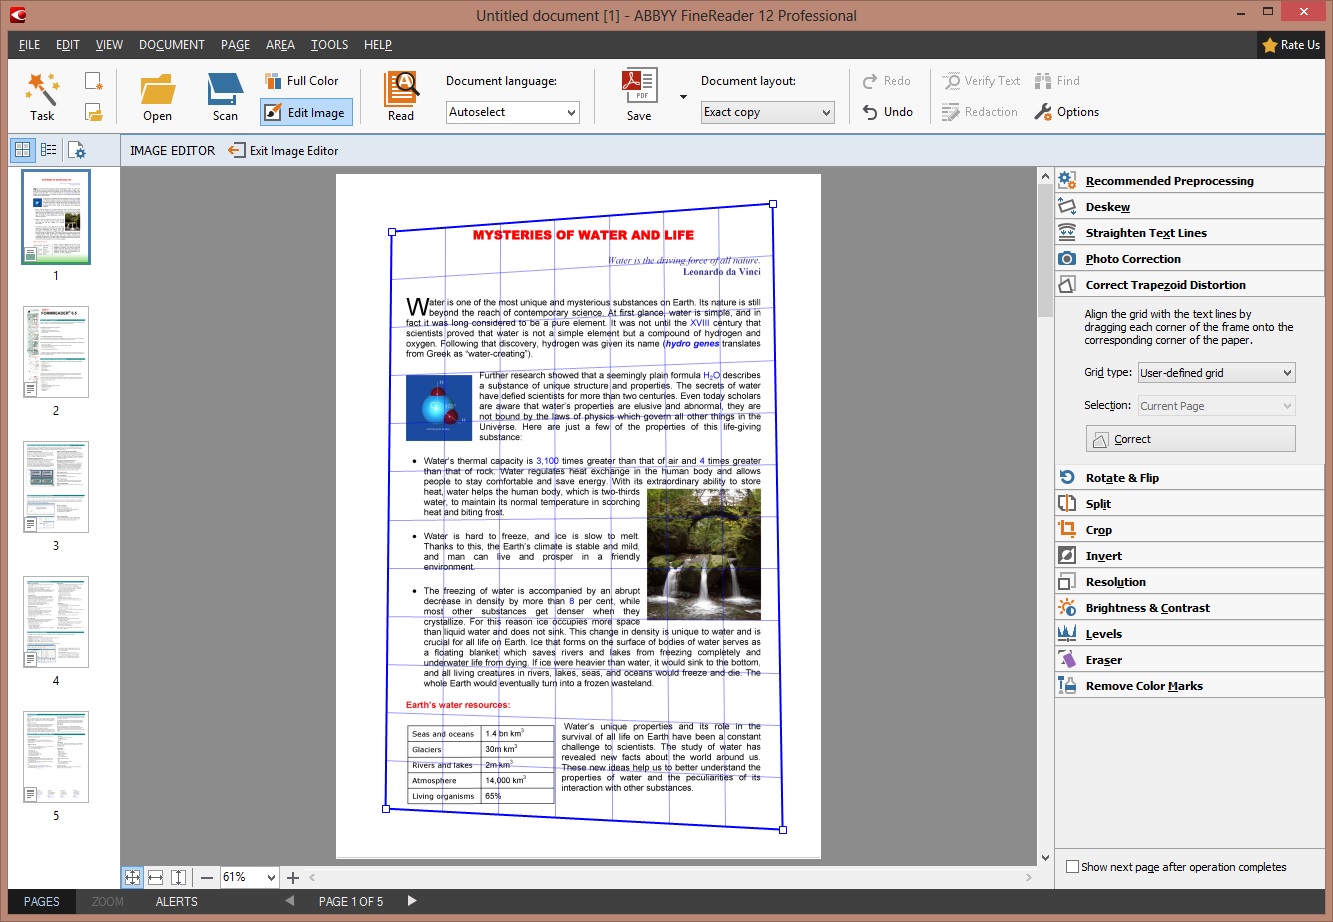 omnipage pro 12.0 free download